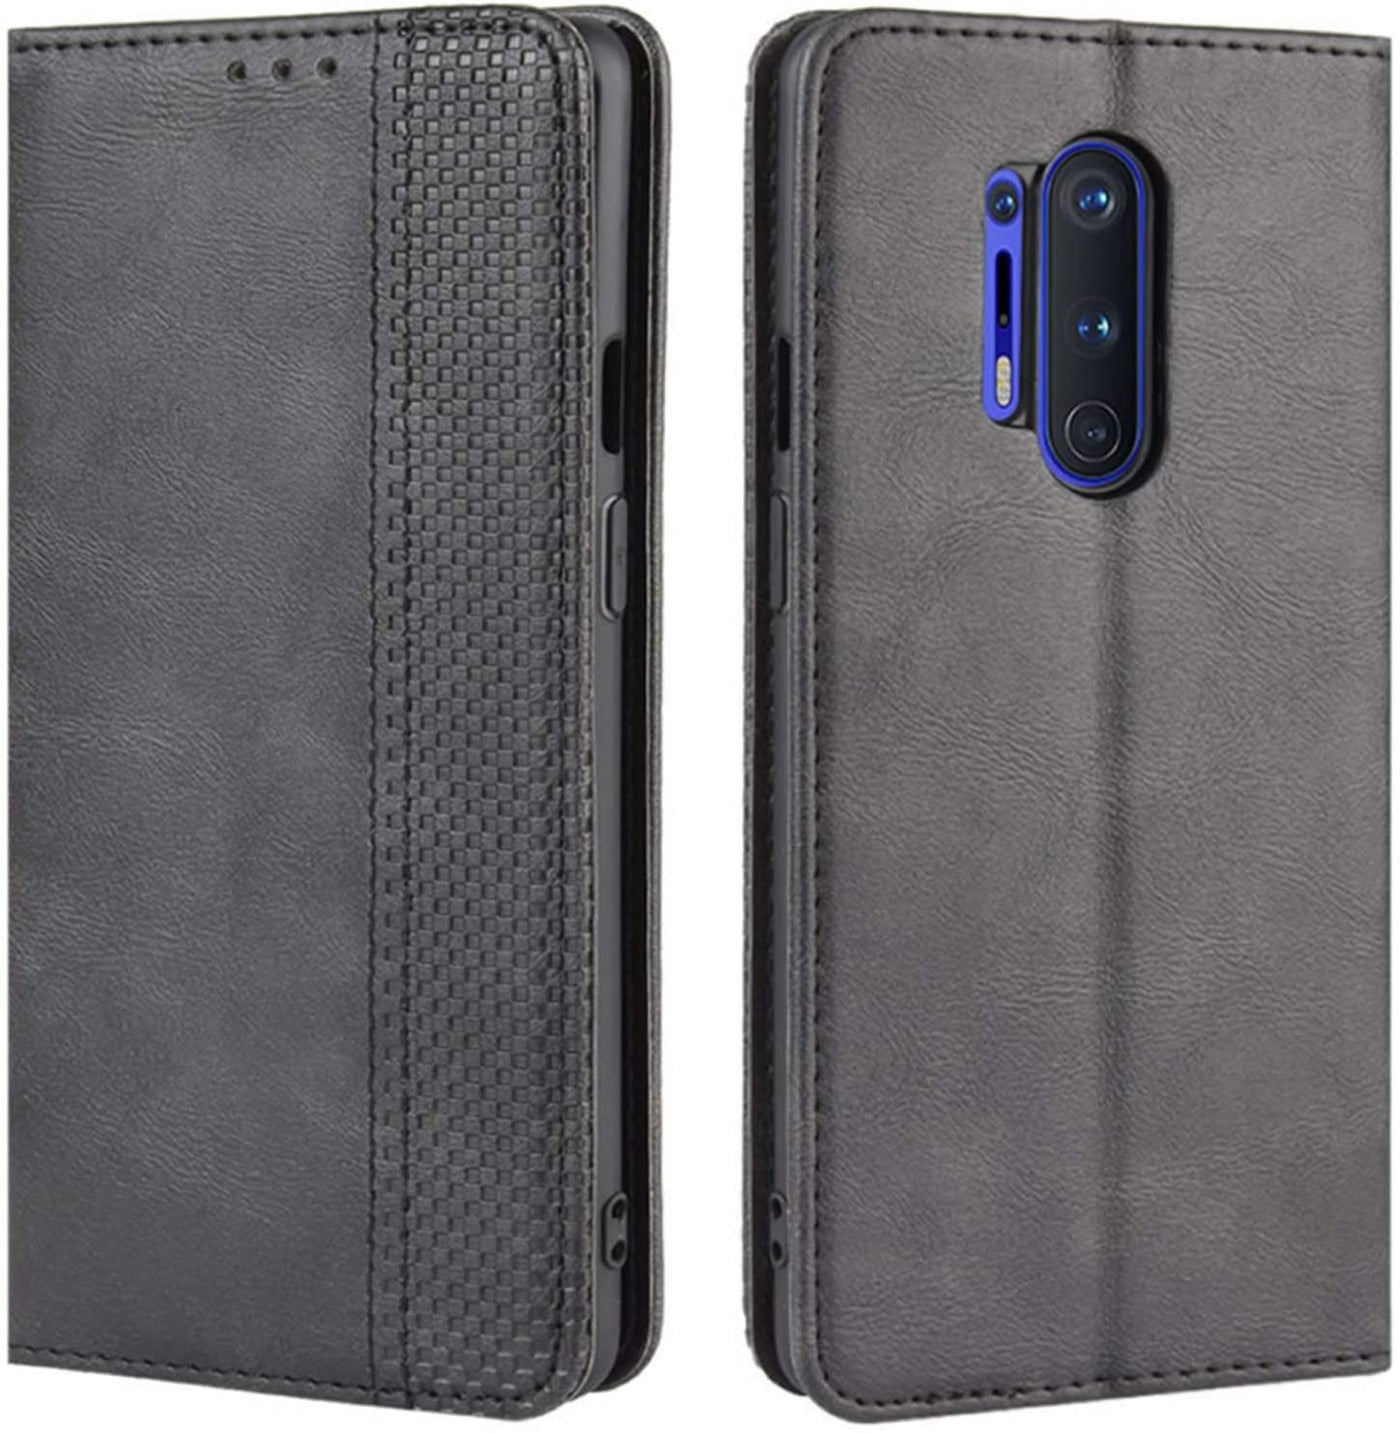 Oneplus 8 Pro full body protection Leather Wallet flip case cover by Excelsior